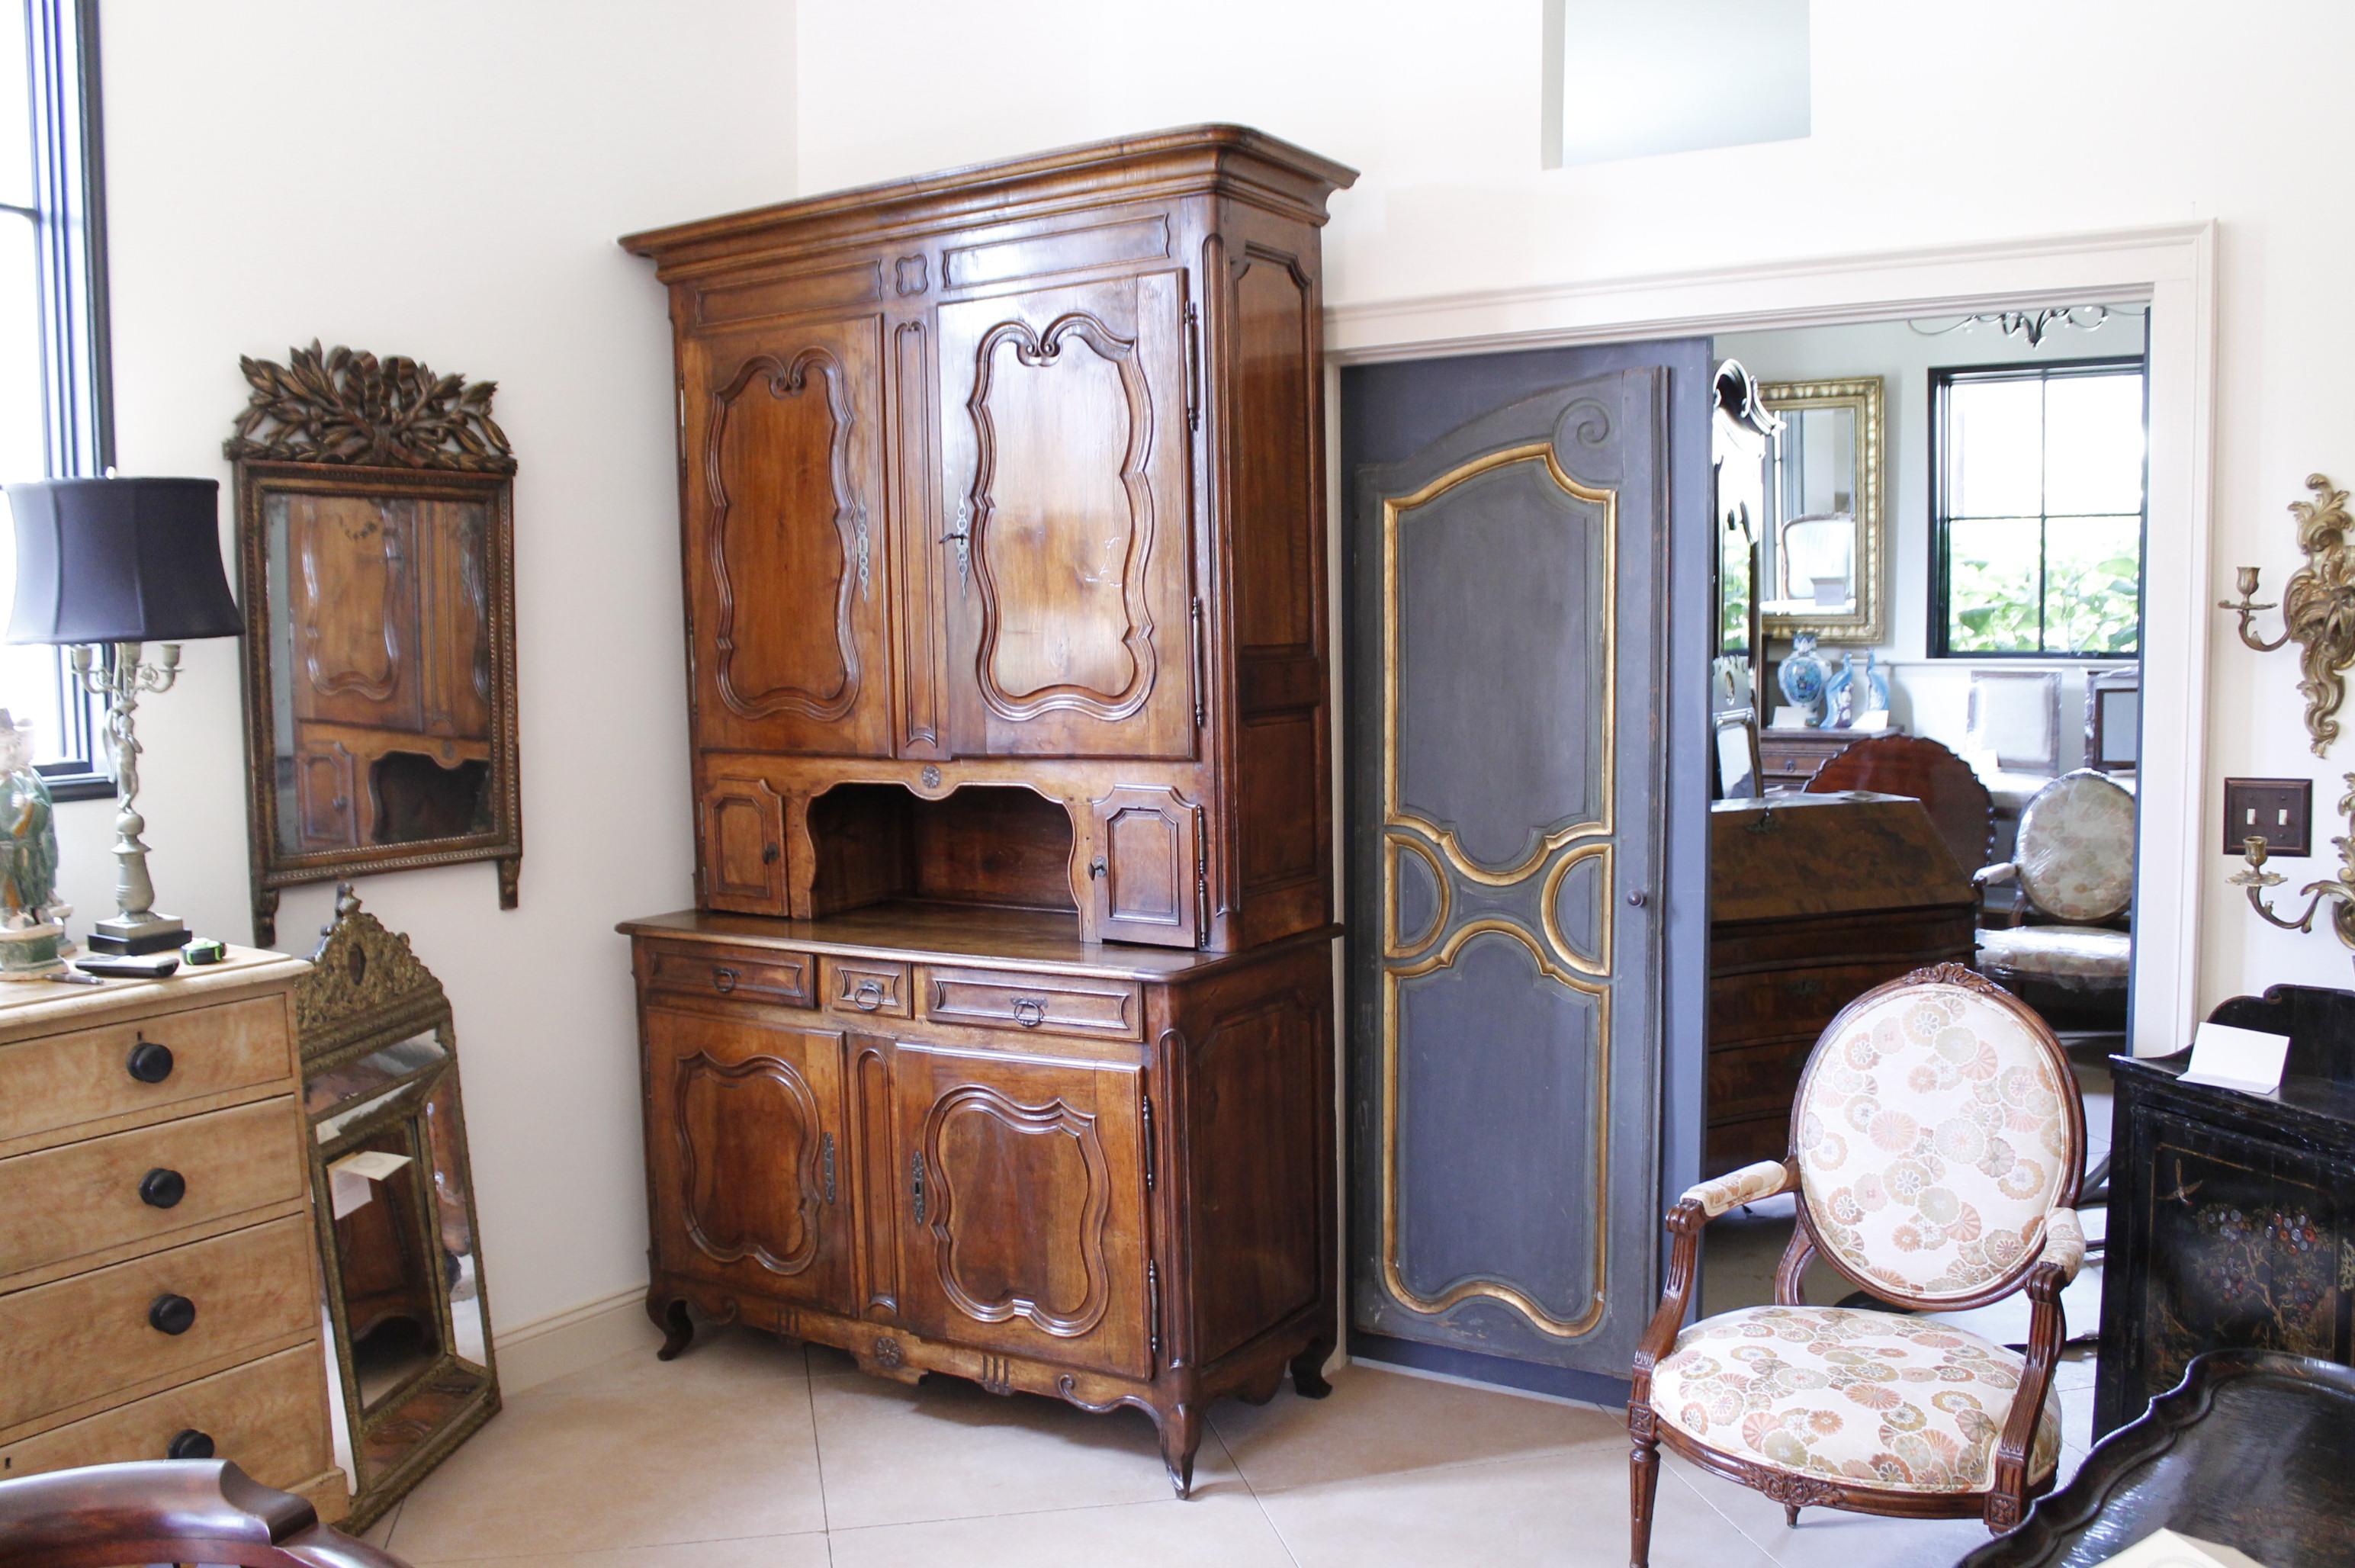 A large and very handsome buffet à deux corps, traditional French two part cupboard. The cabinet below is fitted with one sturdy shelf while the multi-compartmented top portion is fitted for adjustable shelving. The interior of the upper case has